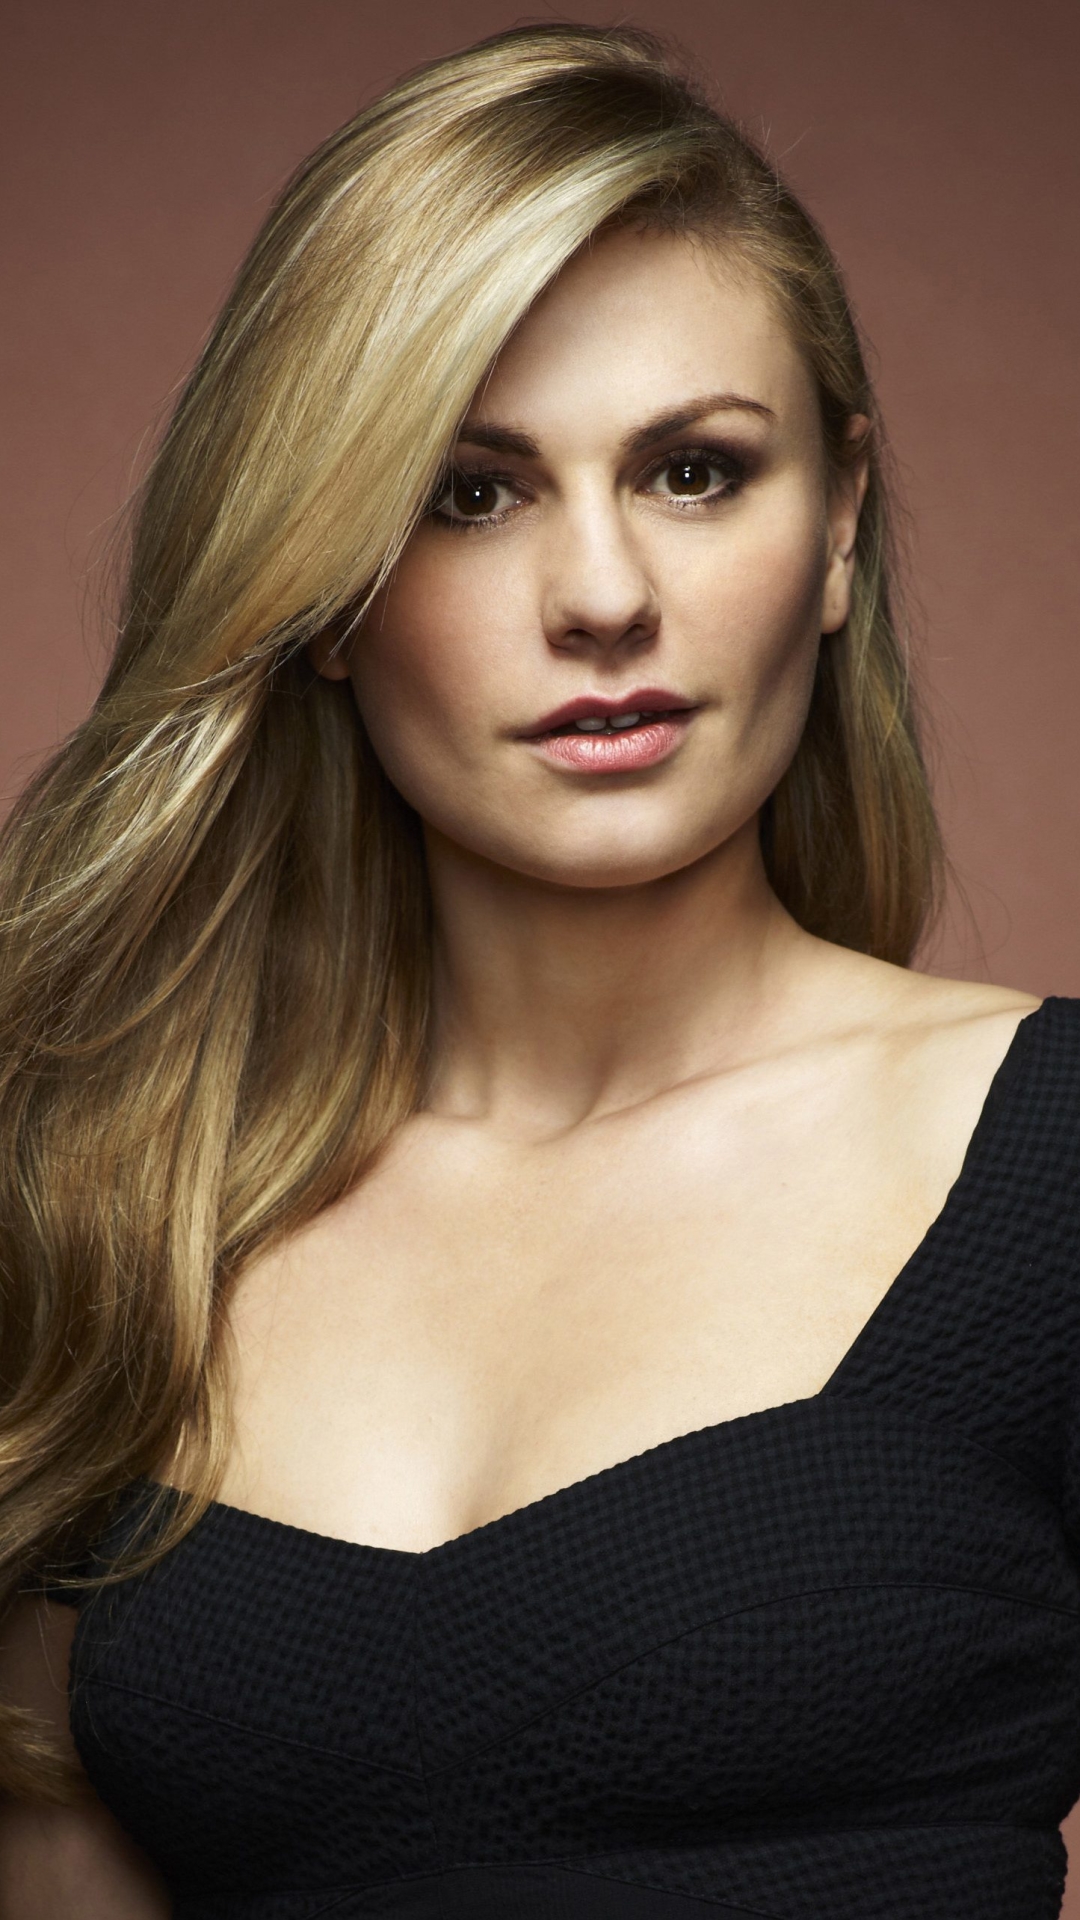 celebrity, anna paquin, brown eyes, american, actress, blonde